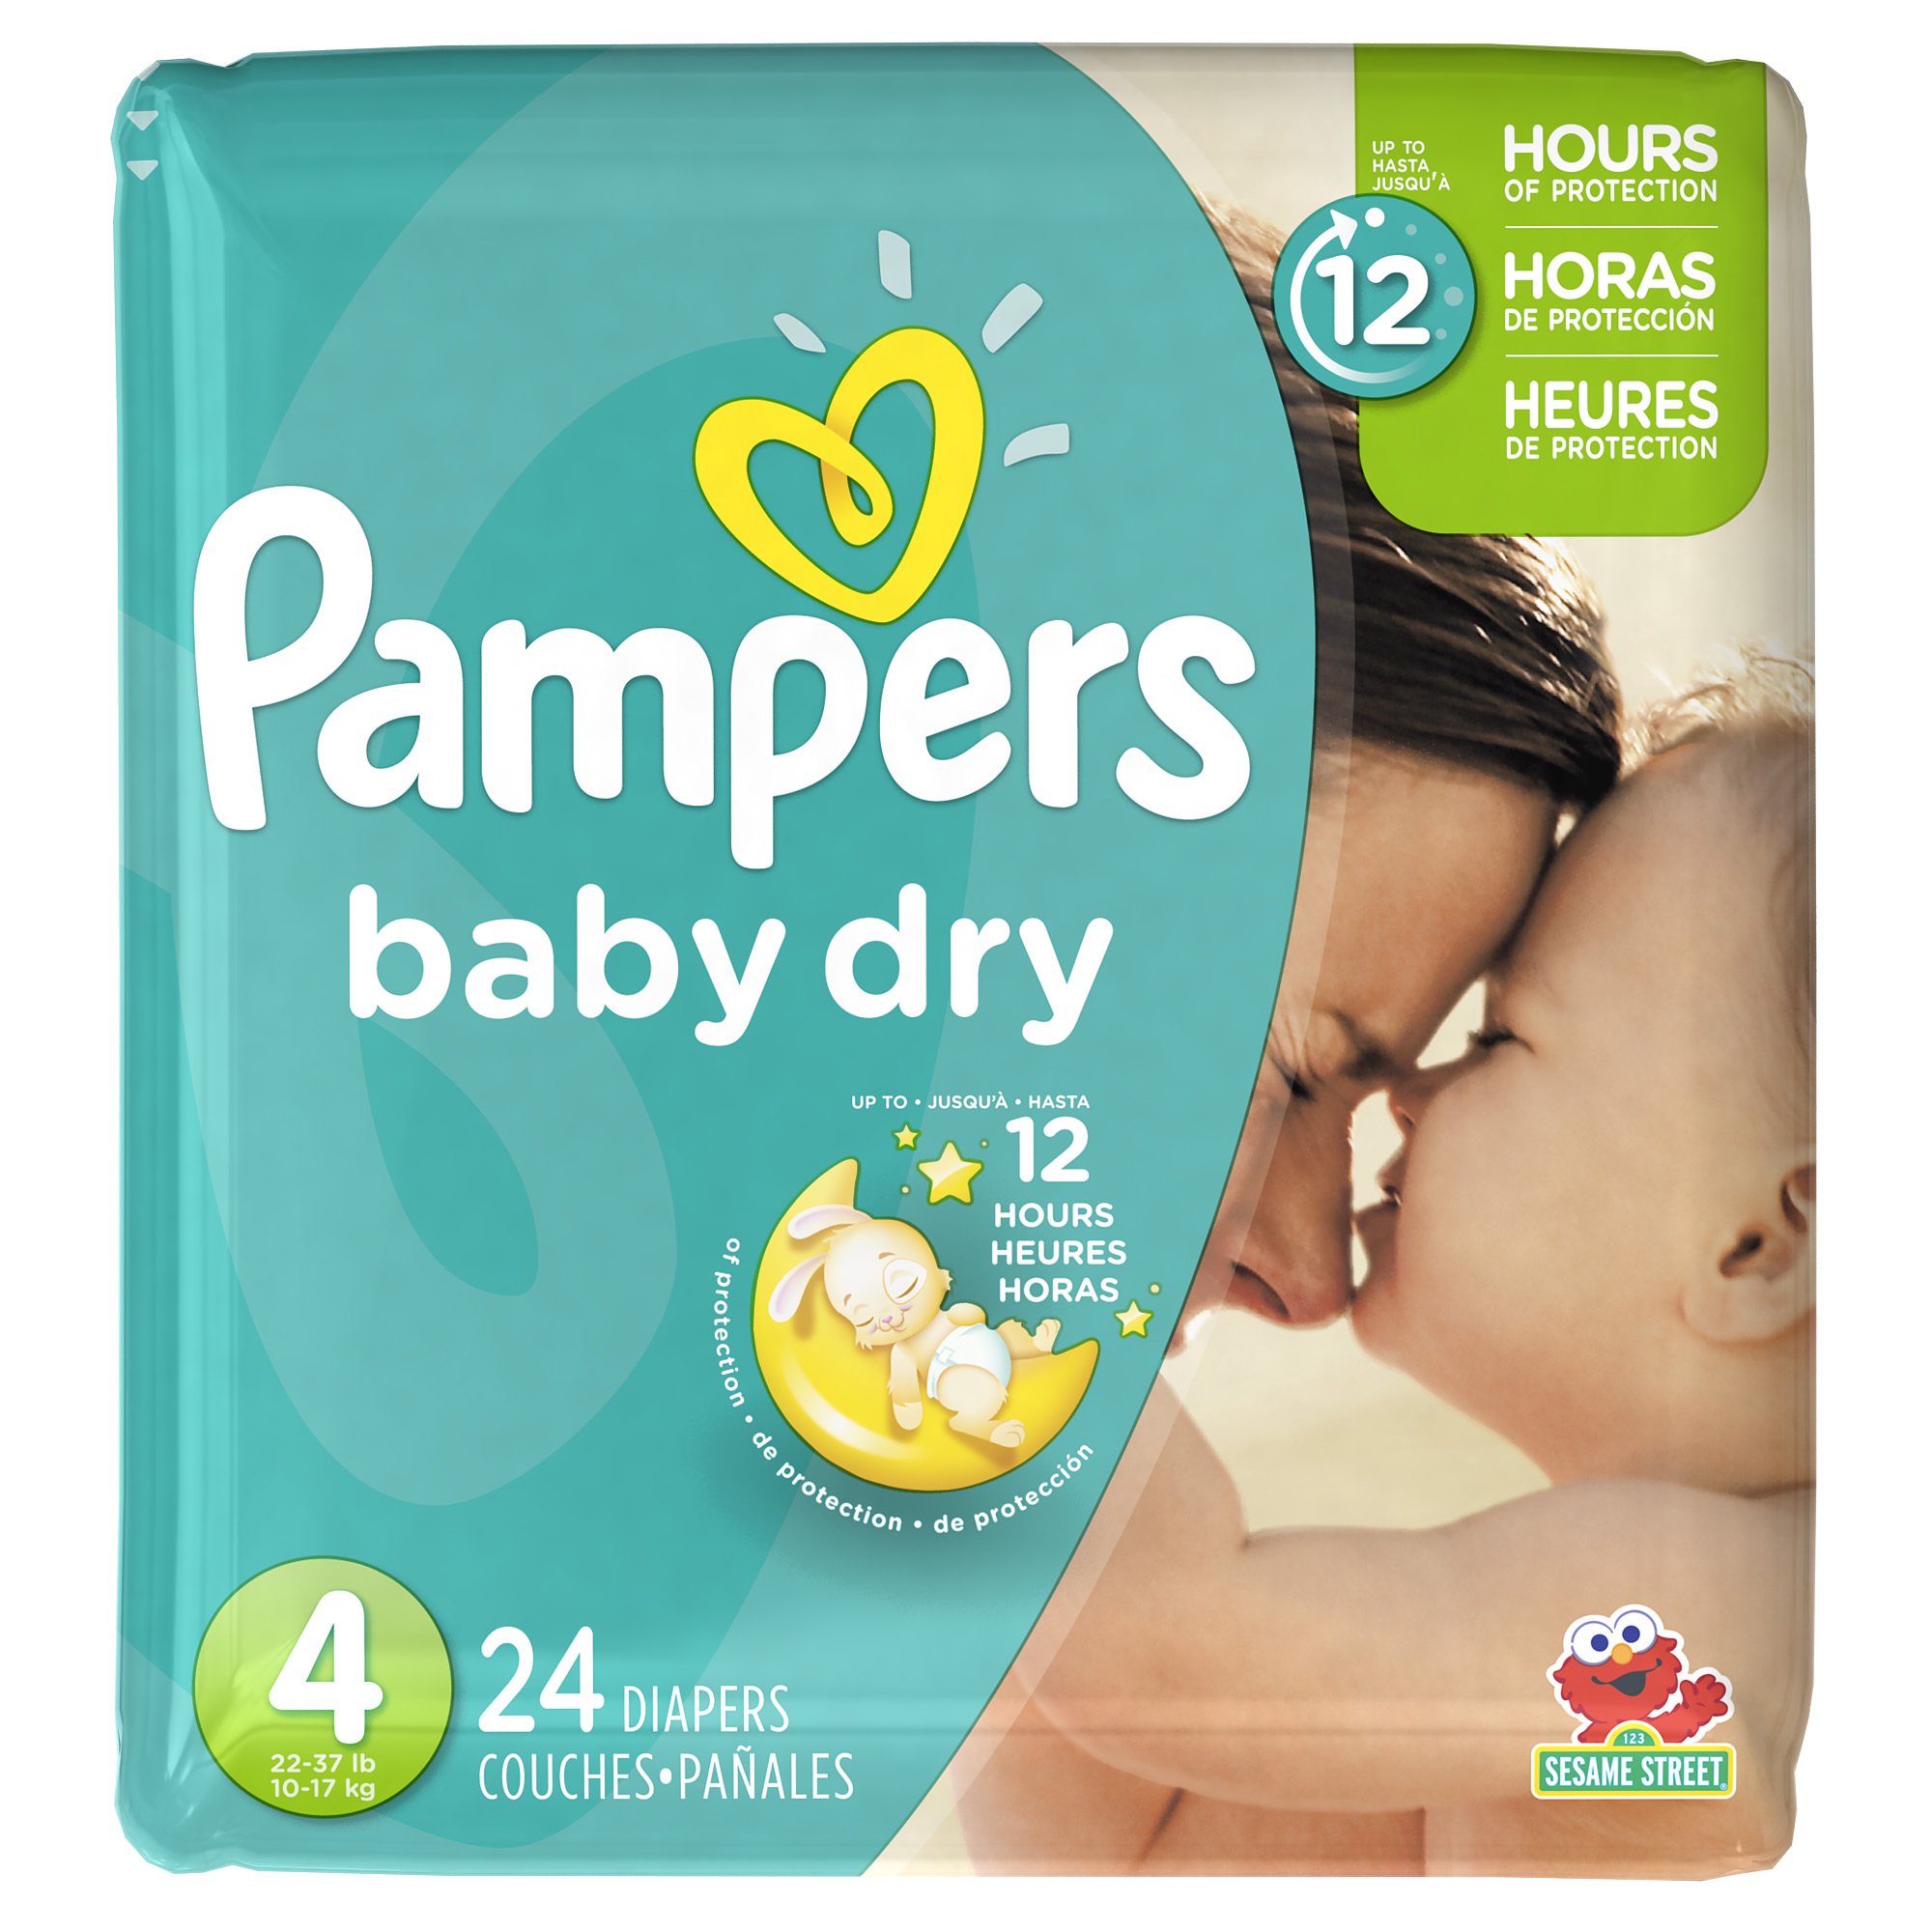 p&g pampers